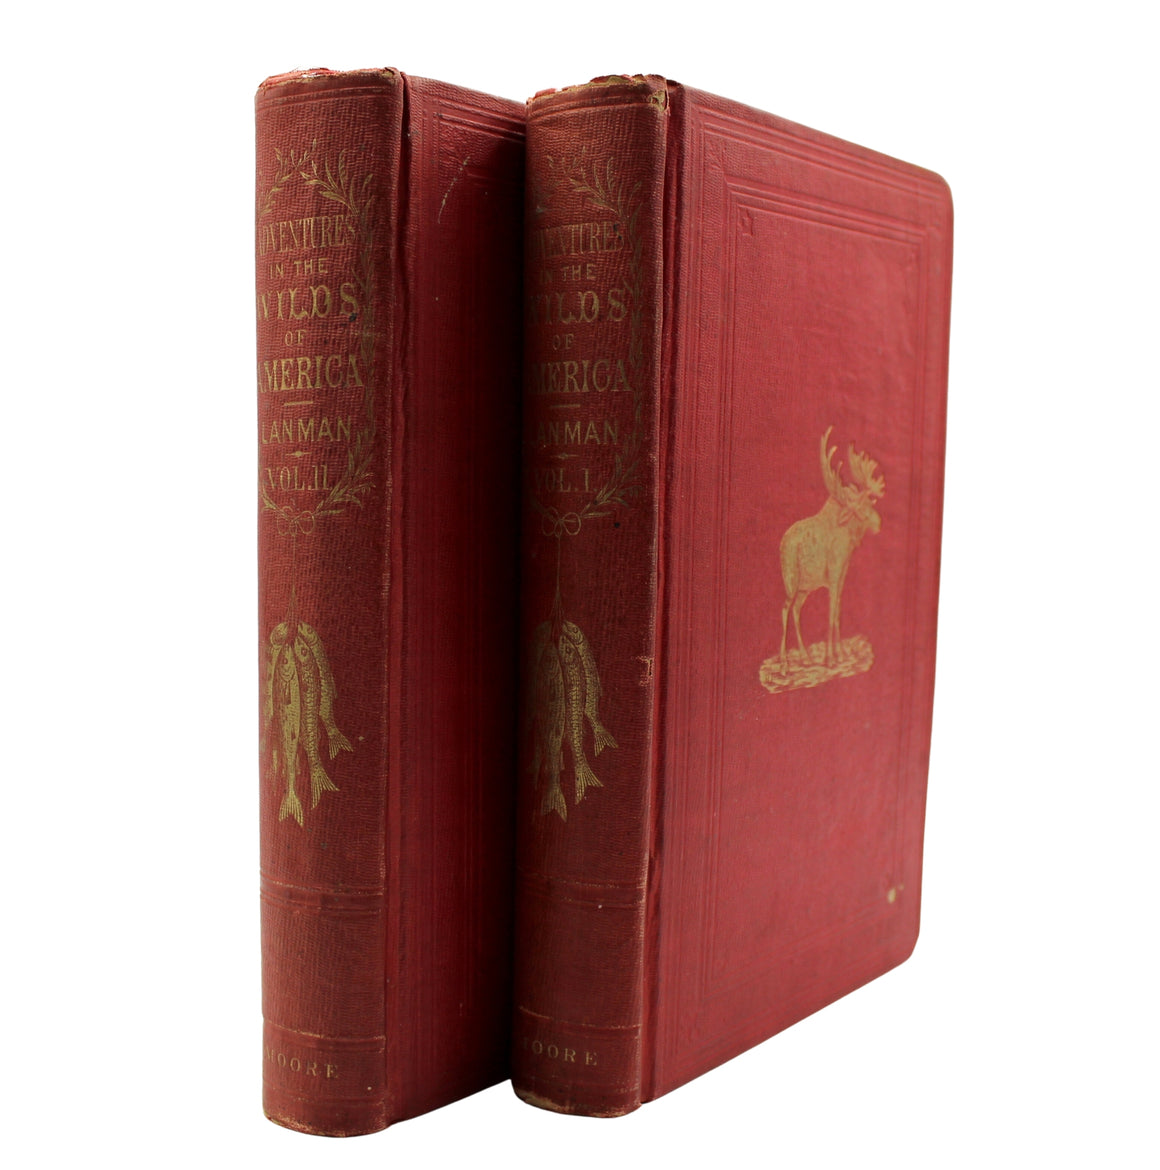 Adventures in the Wilds of the United States and British American Provinces by Charles Lanman, First American Edition, Two Volume Set, 1856